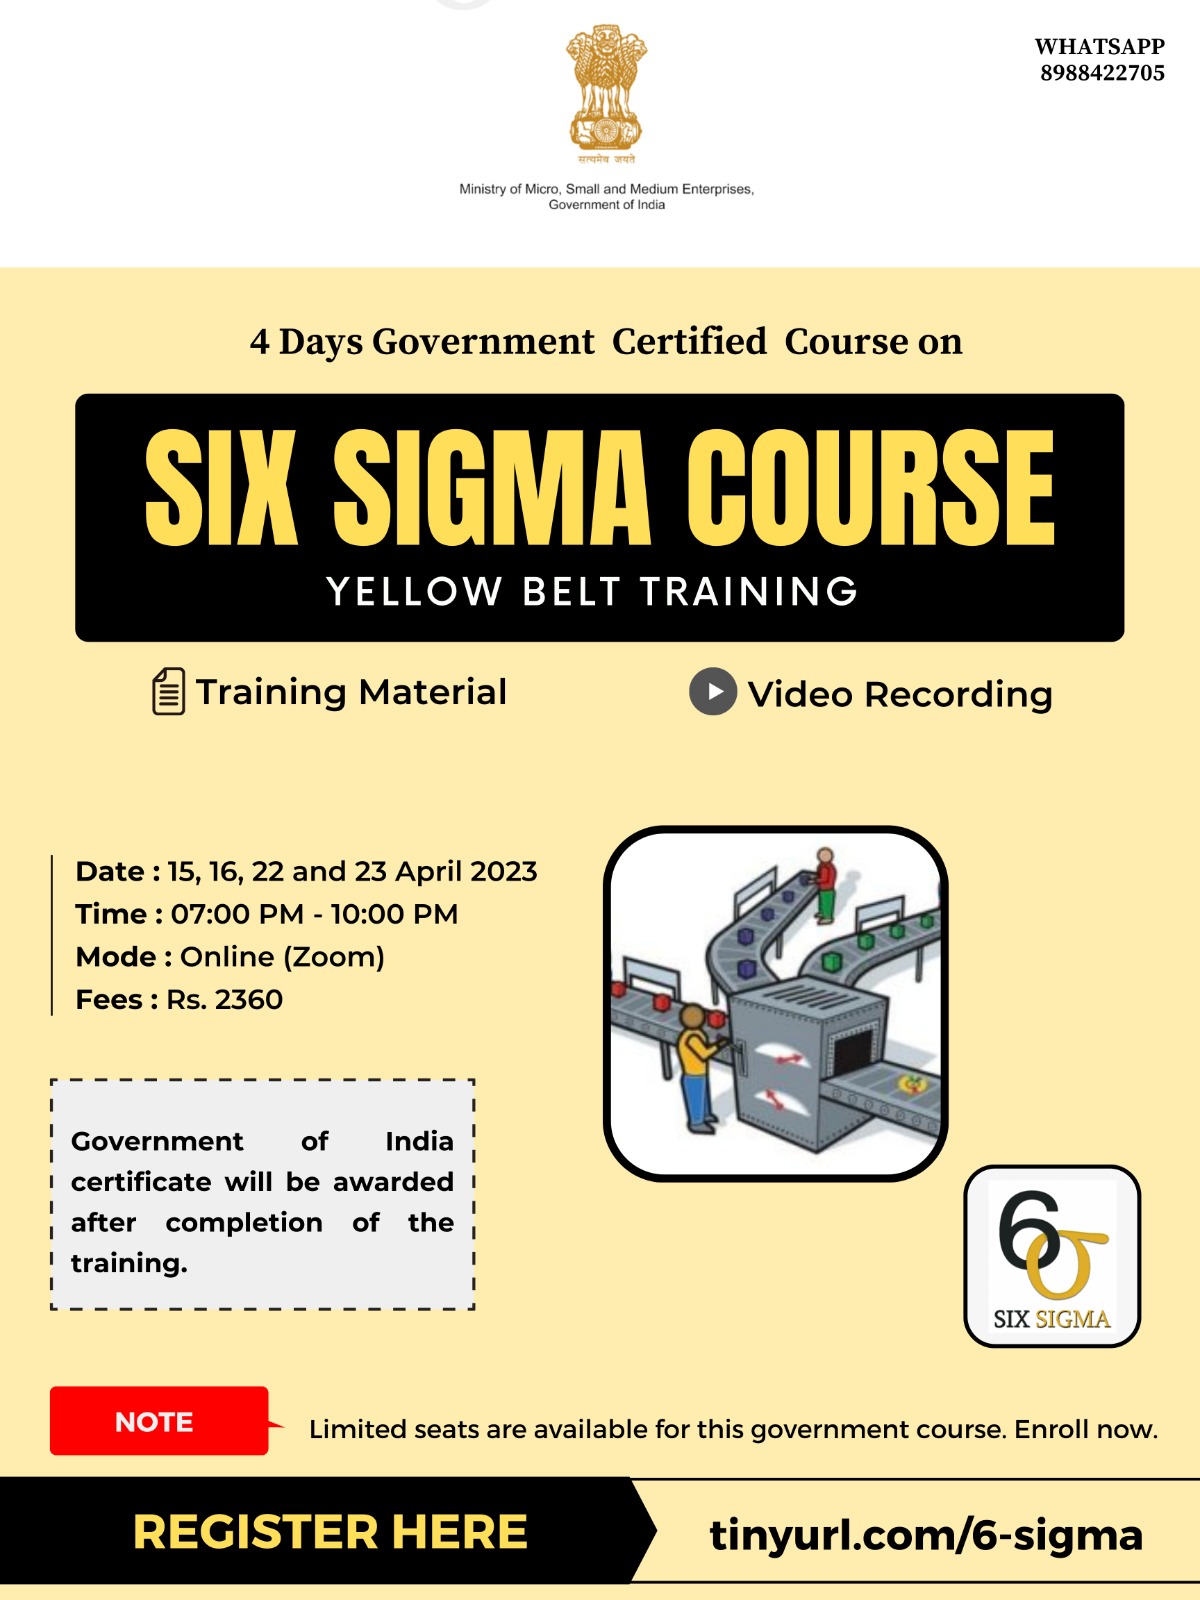 Six Sigma Yellow Belt Training by MSME, Govt of India - Check eligibility, training dates, syllabus, exam pattern, fee structure over here | KATTUFOODTECH